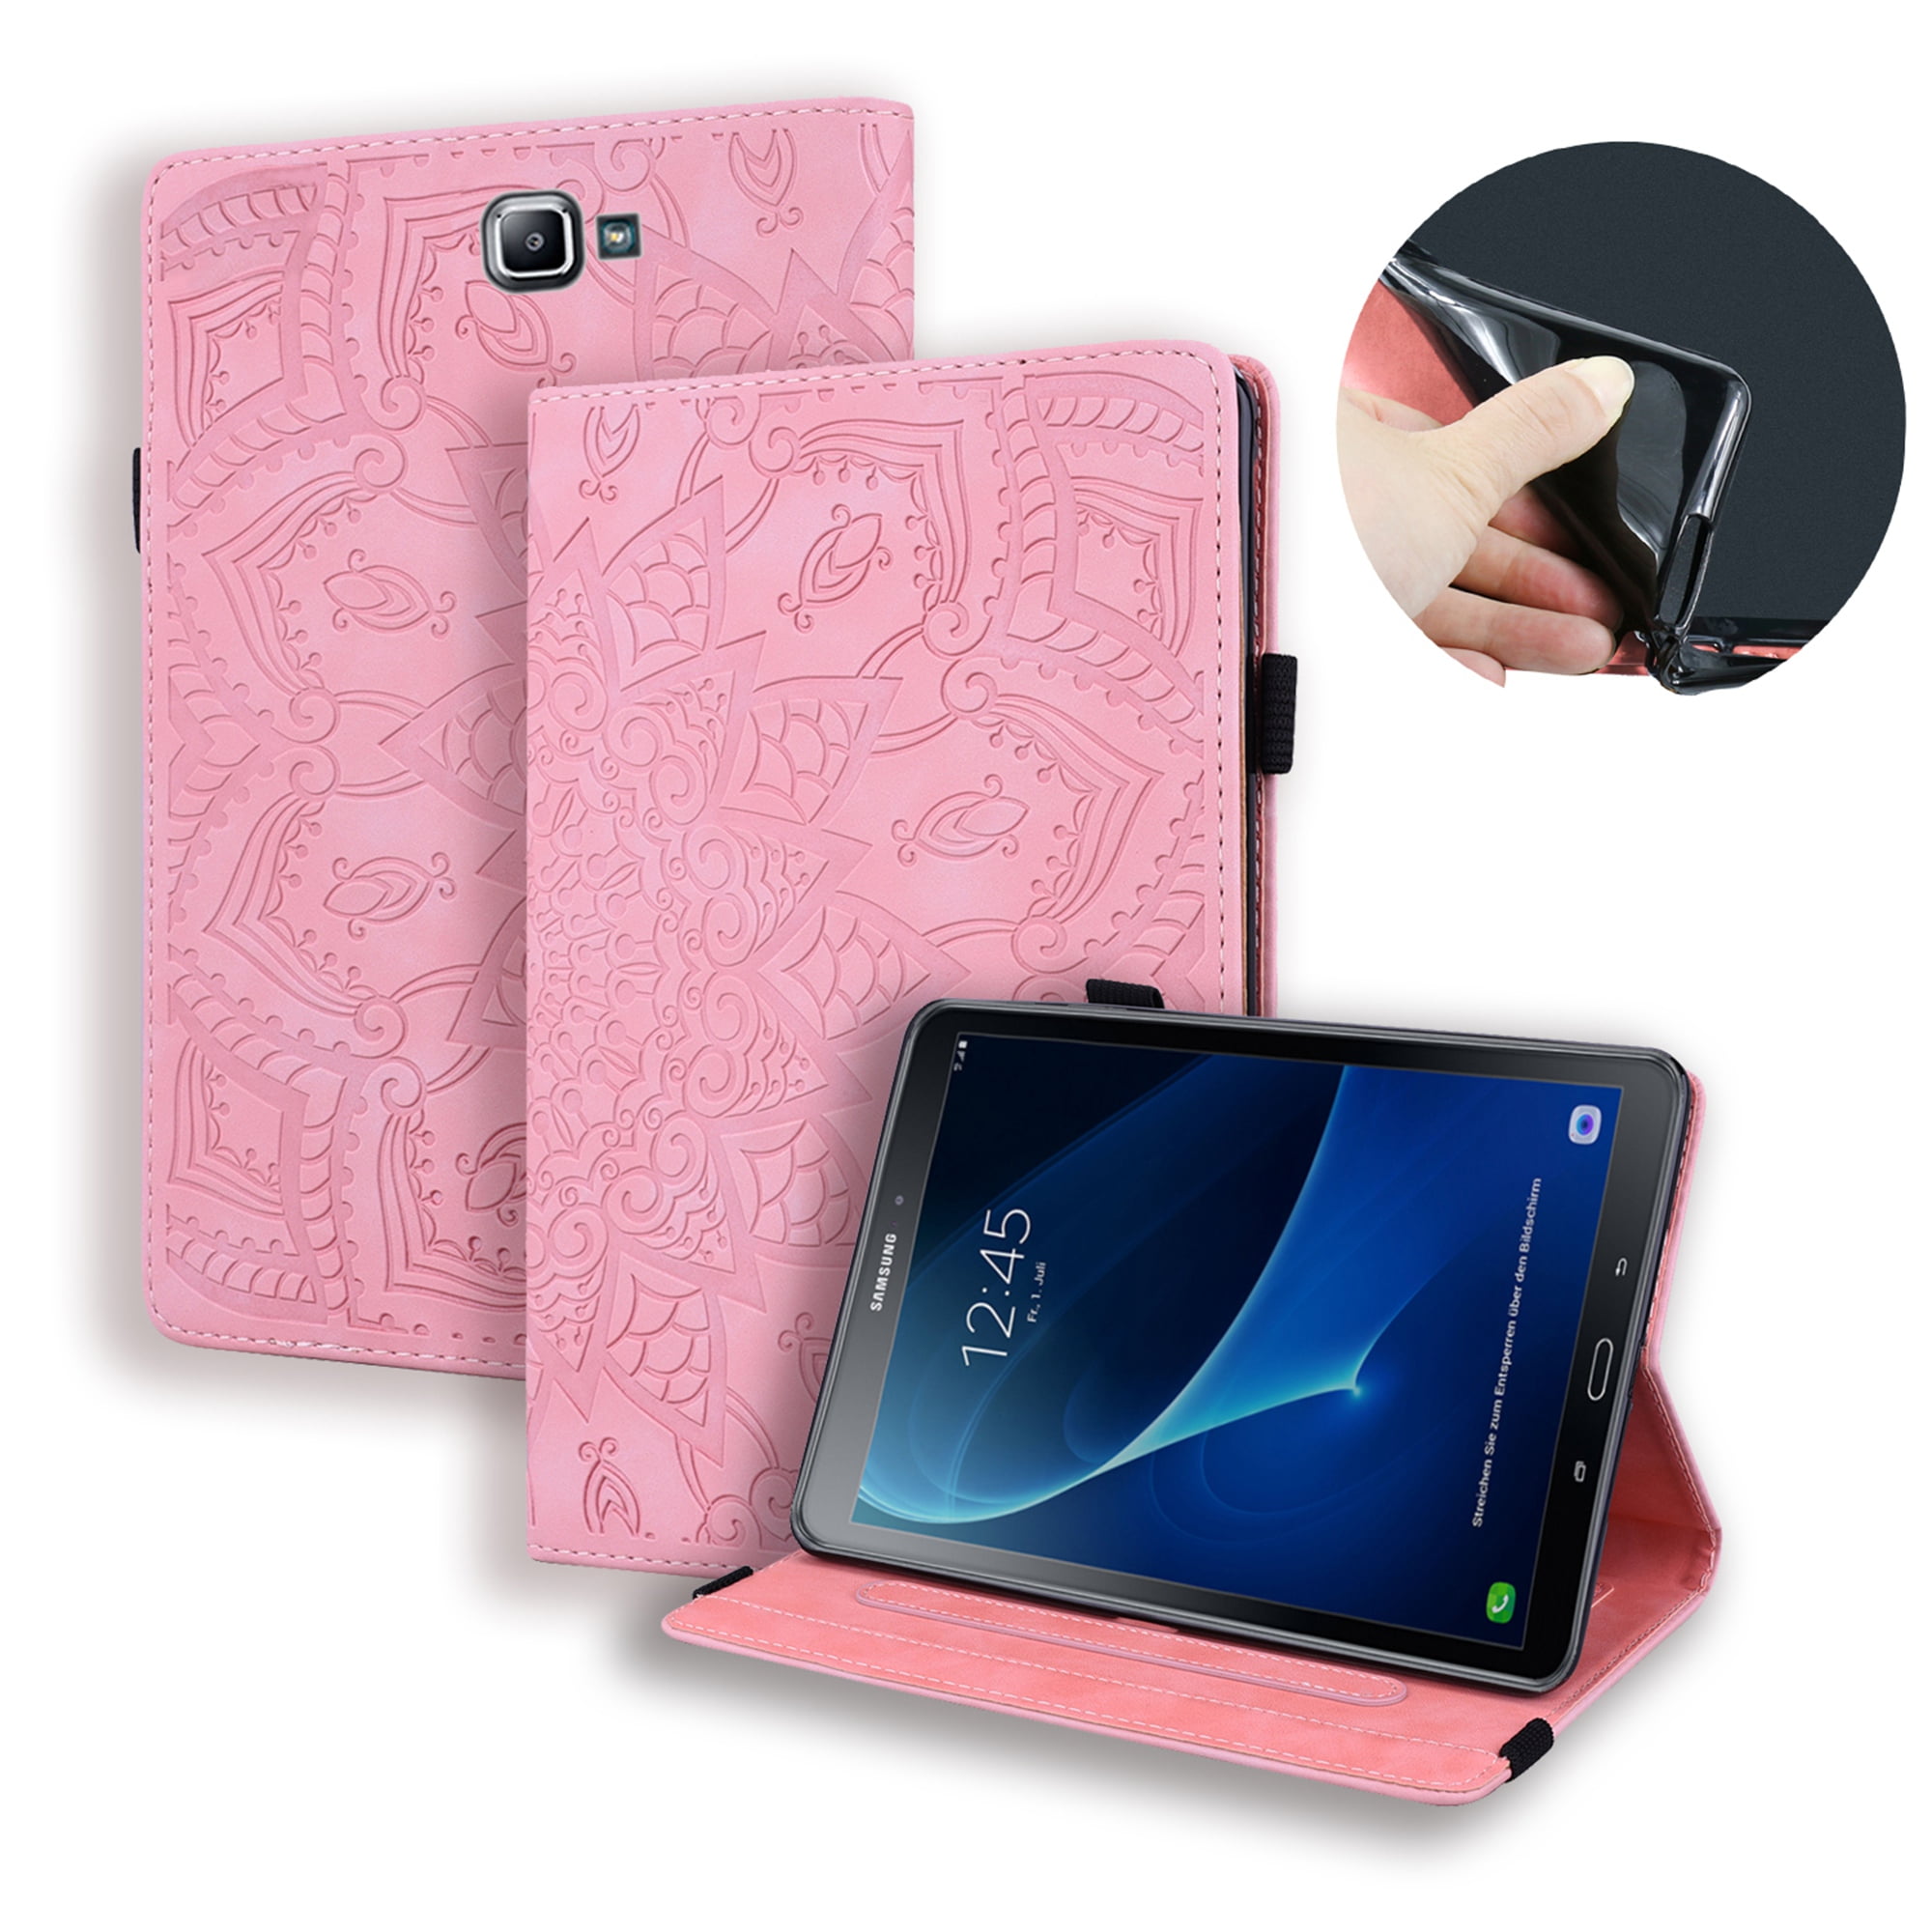 Dteck Embossed Case For Samsung Galaxy Tab A6 10.1 2016 (SM-T580 T585 3D Embossed PU Leather Flip Stand Cover Wallet Case Built-in 4 Card Slots, Pencil Holder, Multi-angels Viewing, Pink -